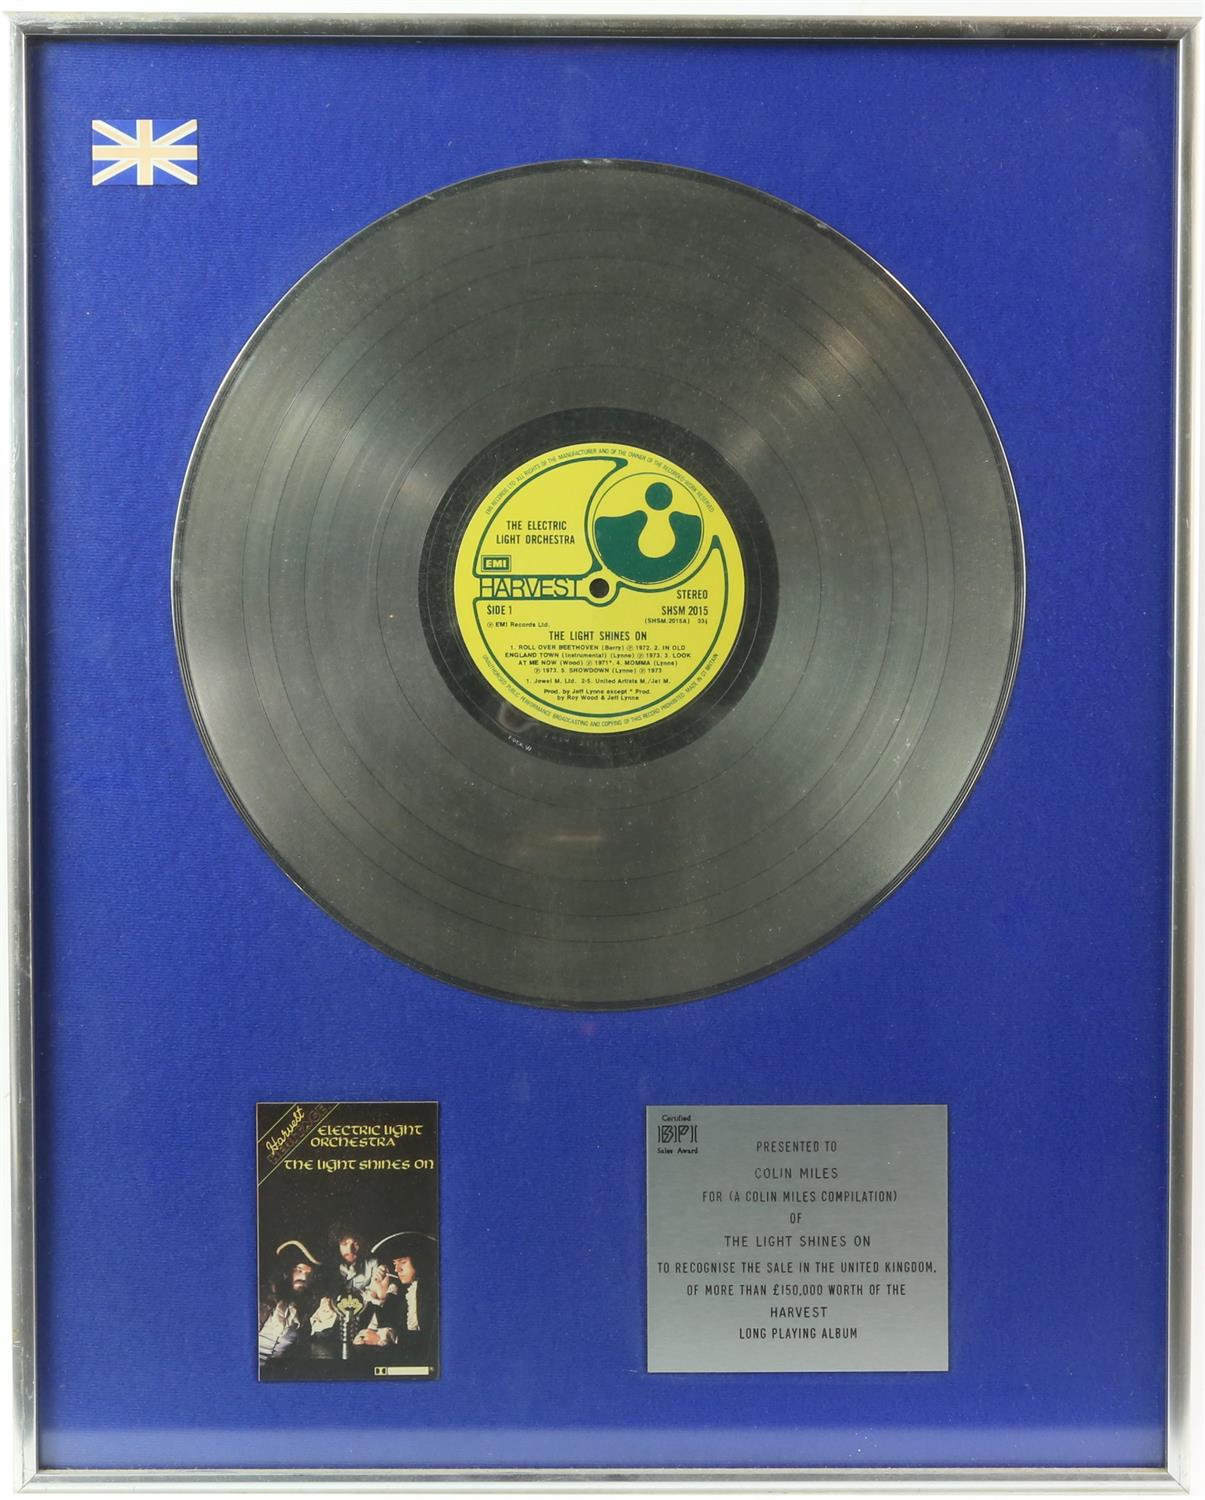 Electric Light Orchestra - Certified BPI Platinum Disc award presented to Colin Miles for (A Colin